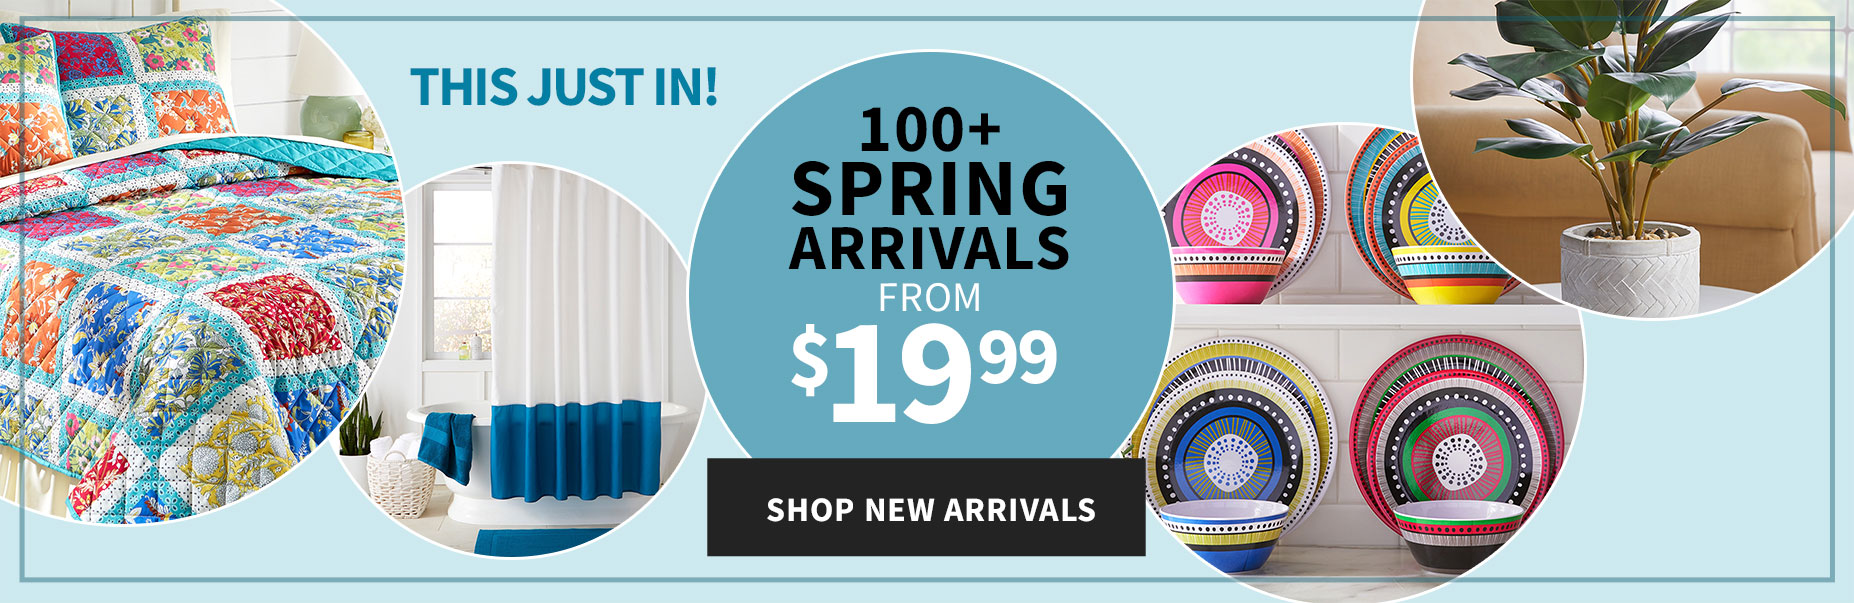 This Just in! 100+ Spring Arrivals from $19.99.